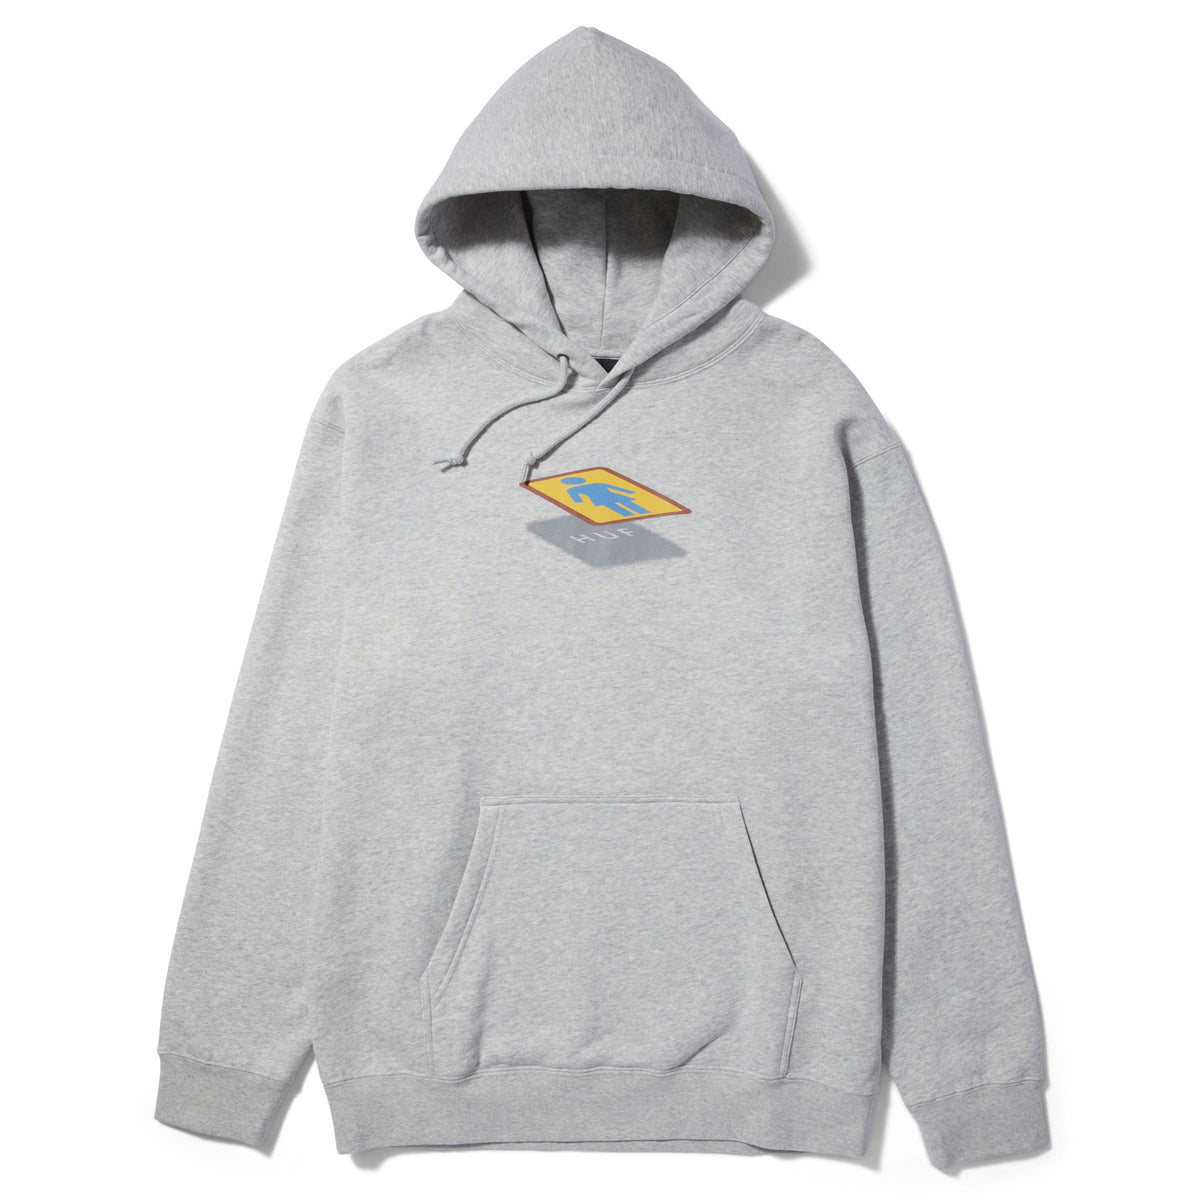 HUF x Girl Skateboards Shadow Pullover Hoodie - Athletic Heather